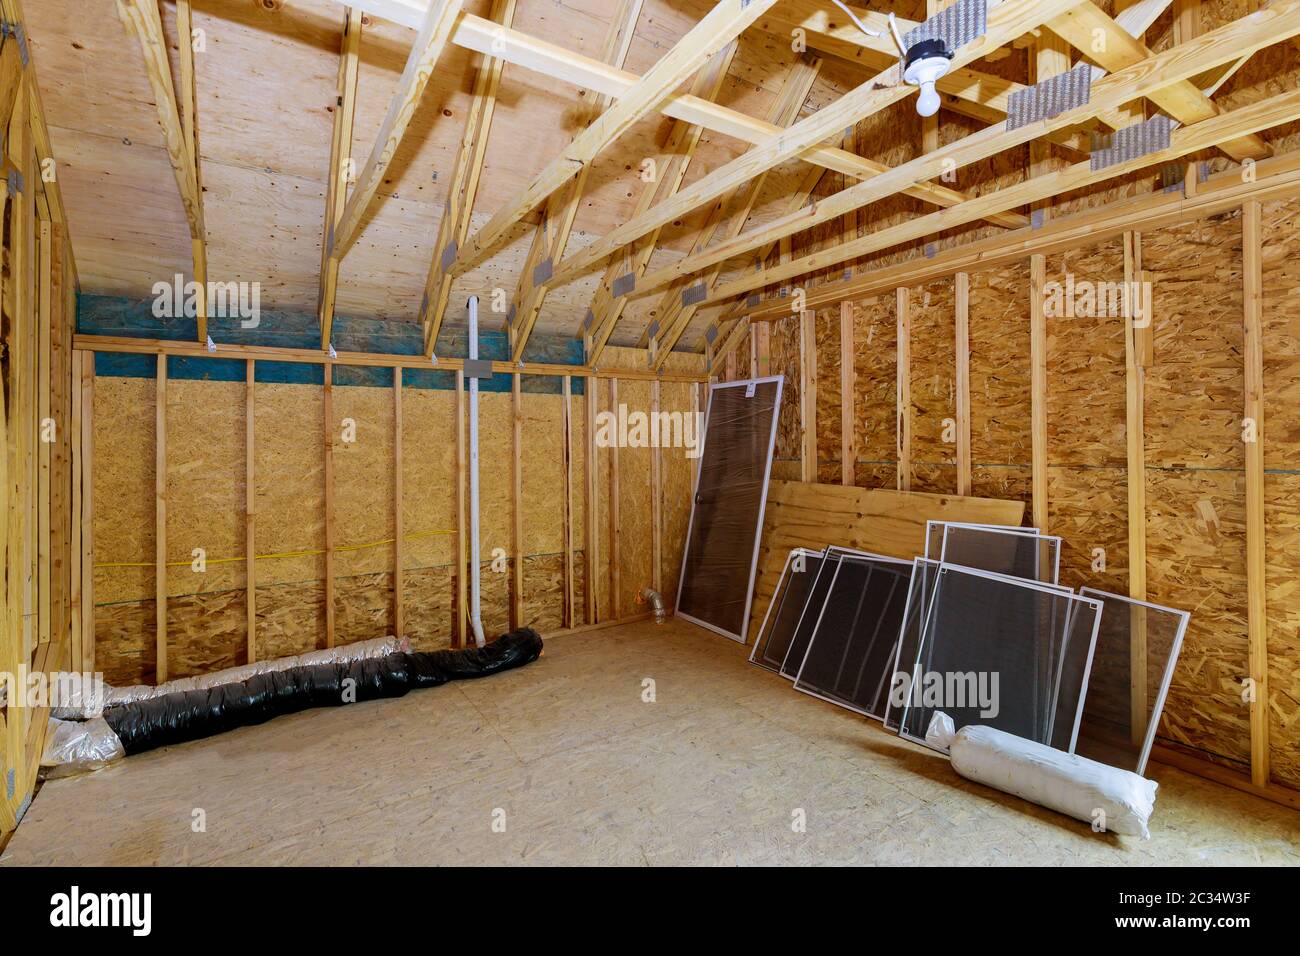 Beam framework frame house attic under construction interior inside a frame walls and ceiling in wooden material Stock Photo